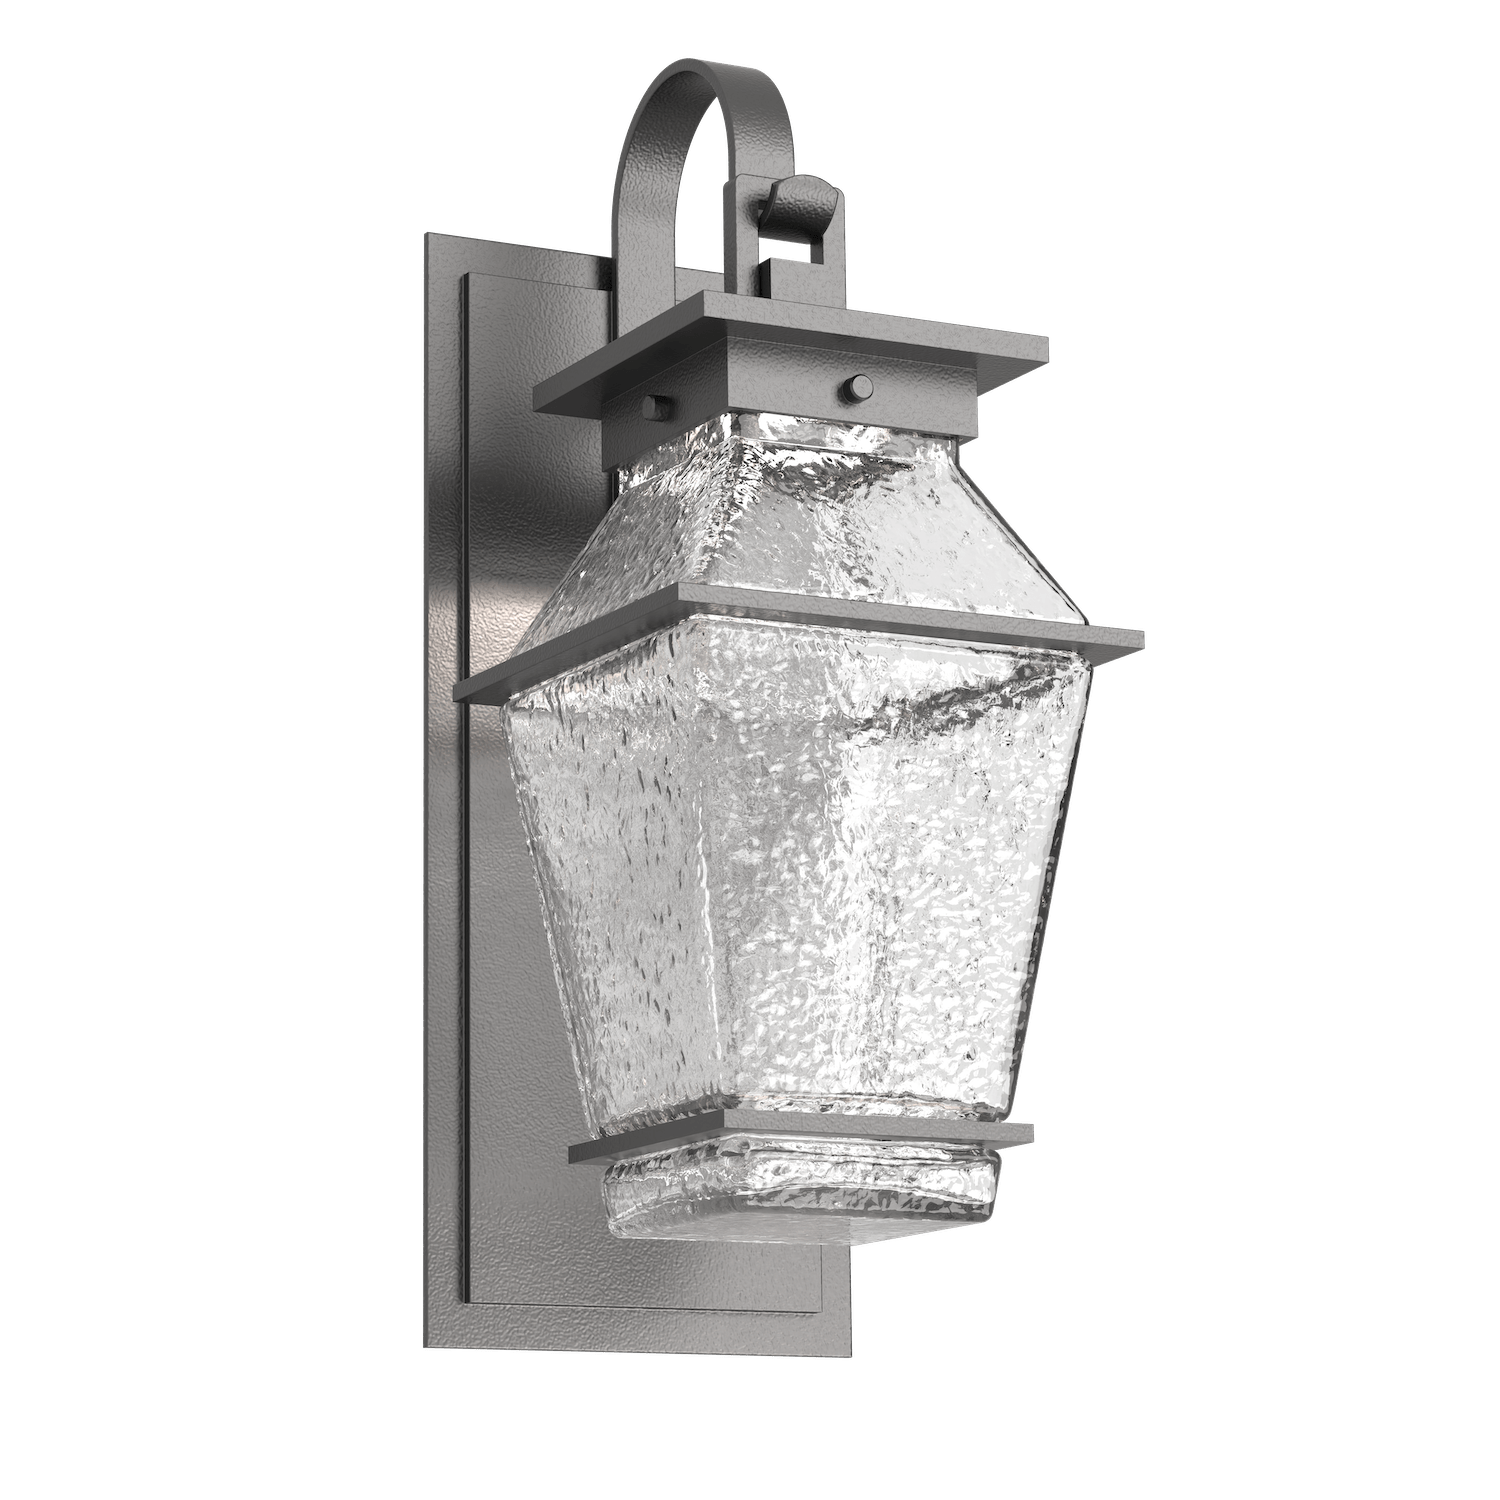 ODB0077-02-AG-C-Hammerton-Studio-Landmark-19-inch-outdoor-sconce-with-shepherds-hook-with-argento-grey-finish-and-clear-blown-glass-shades-and-LED-lamping